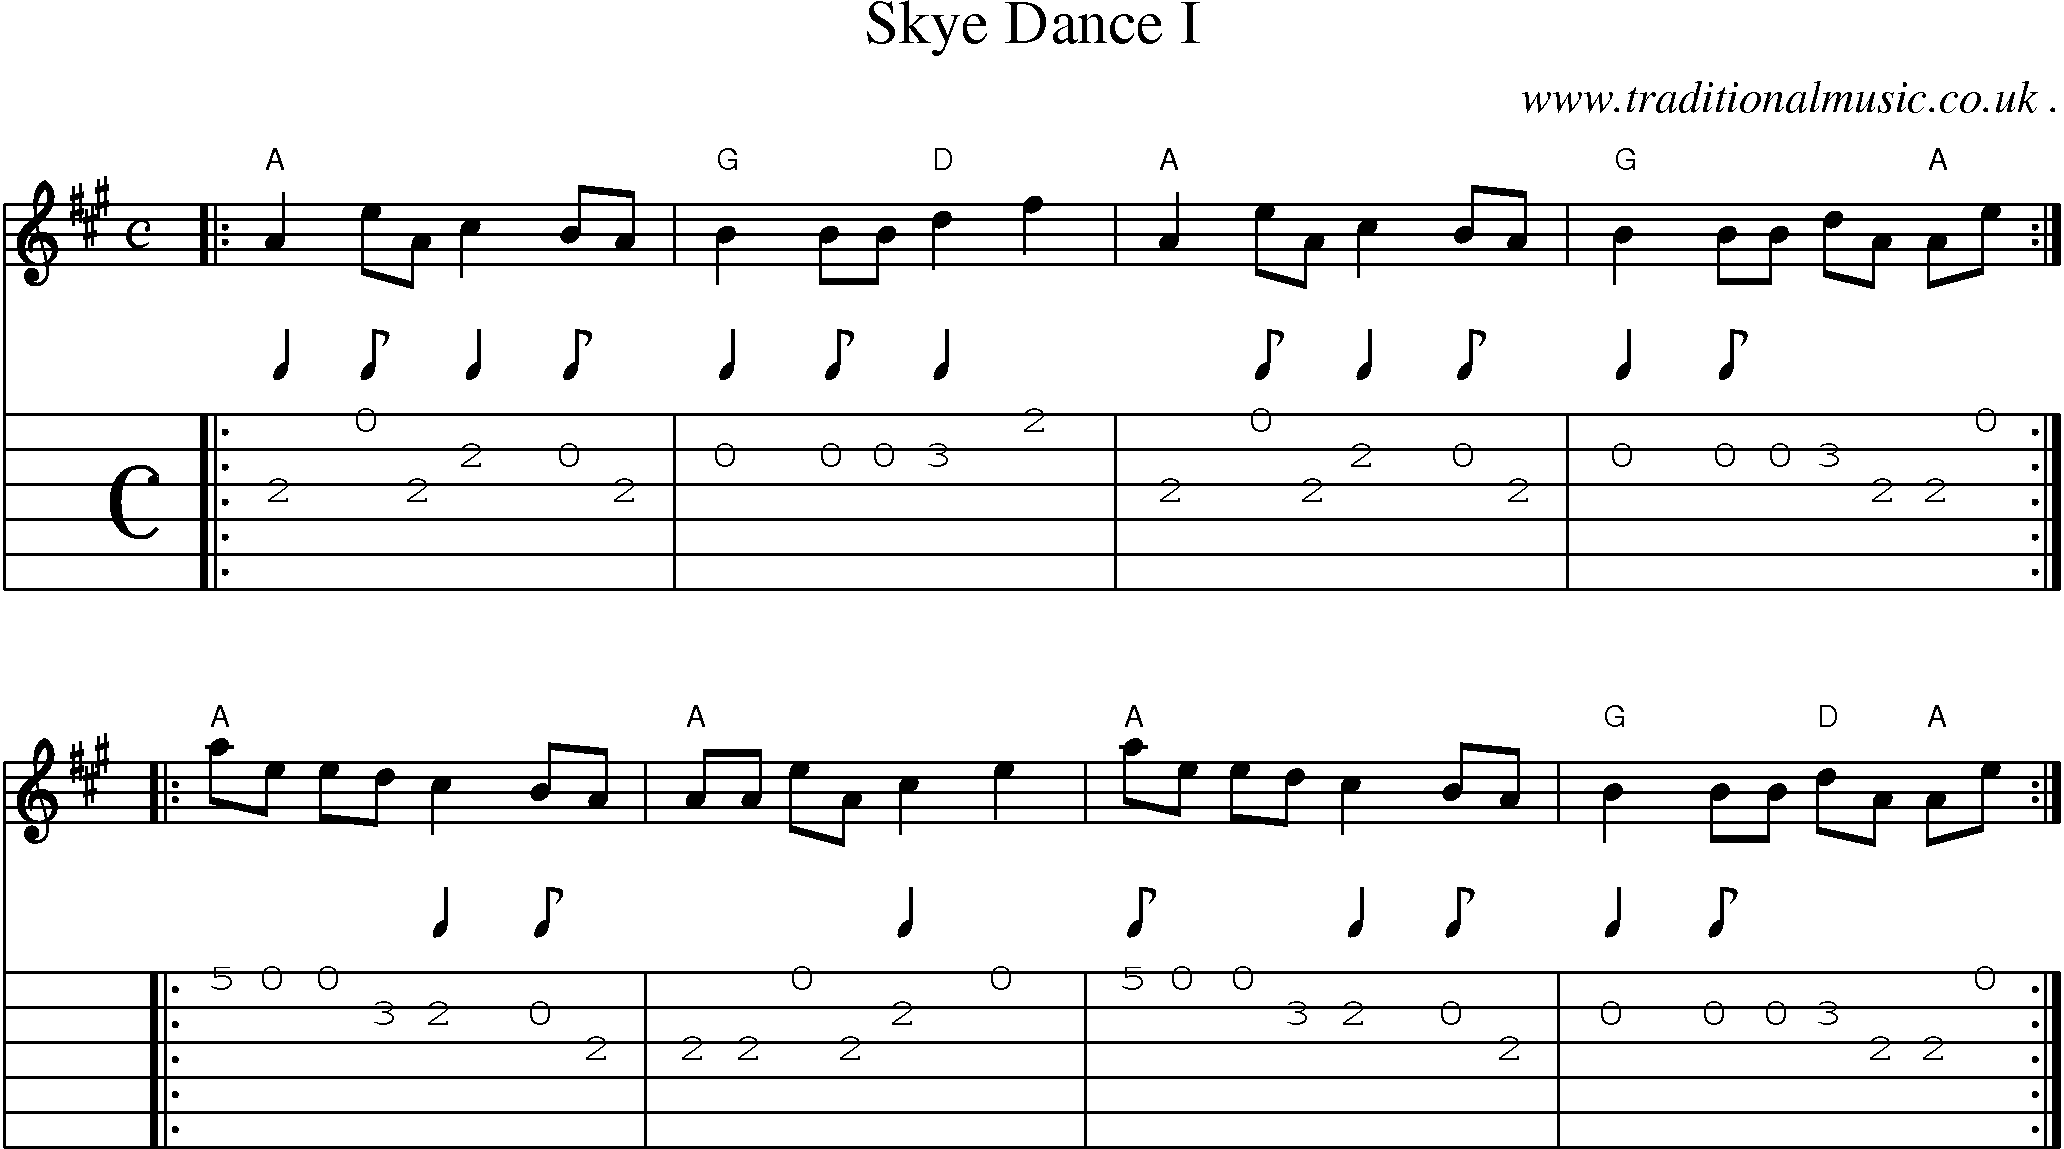 Sheet-music  score, Chords and Guitar Tabs for Skye Dance I